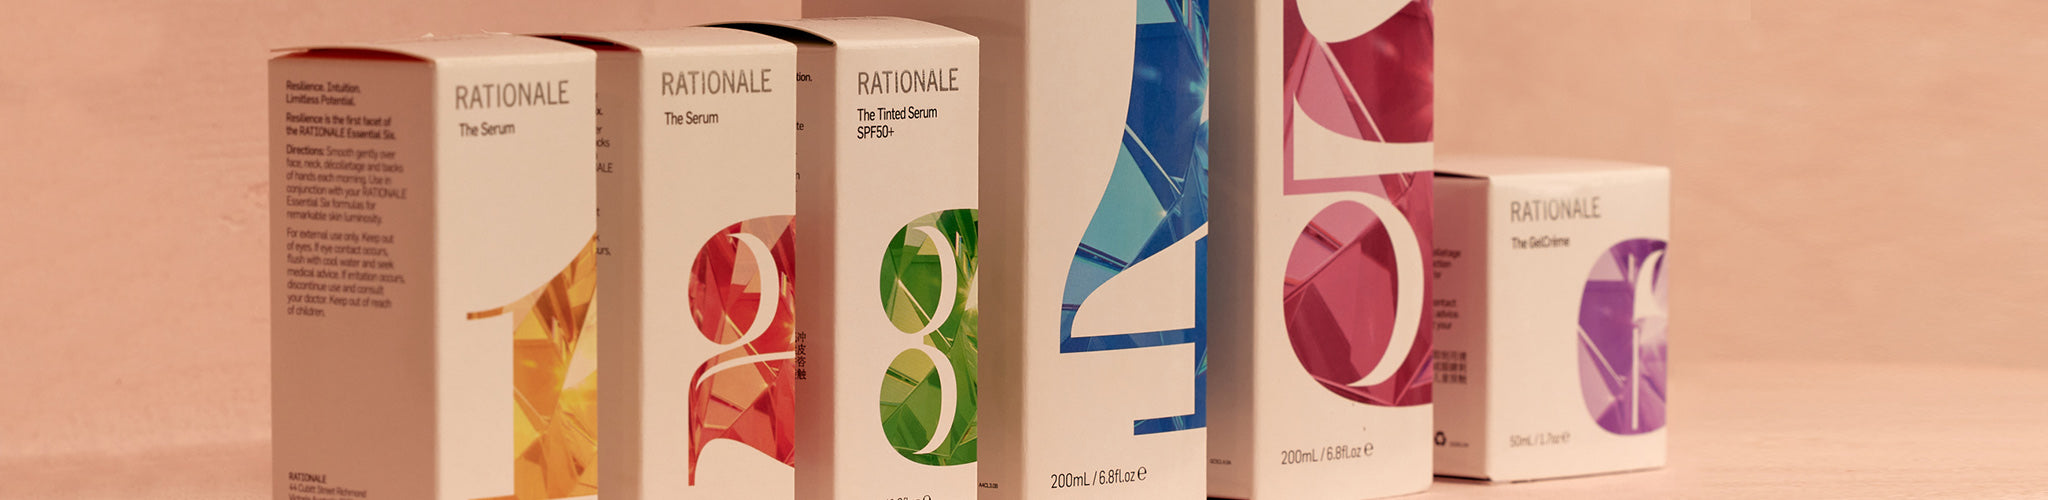 RATIONALE Collection Header